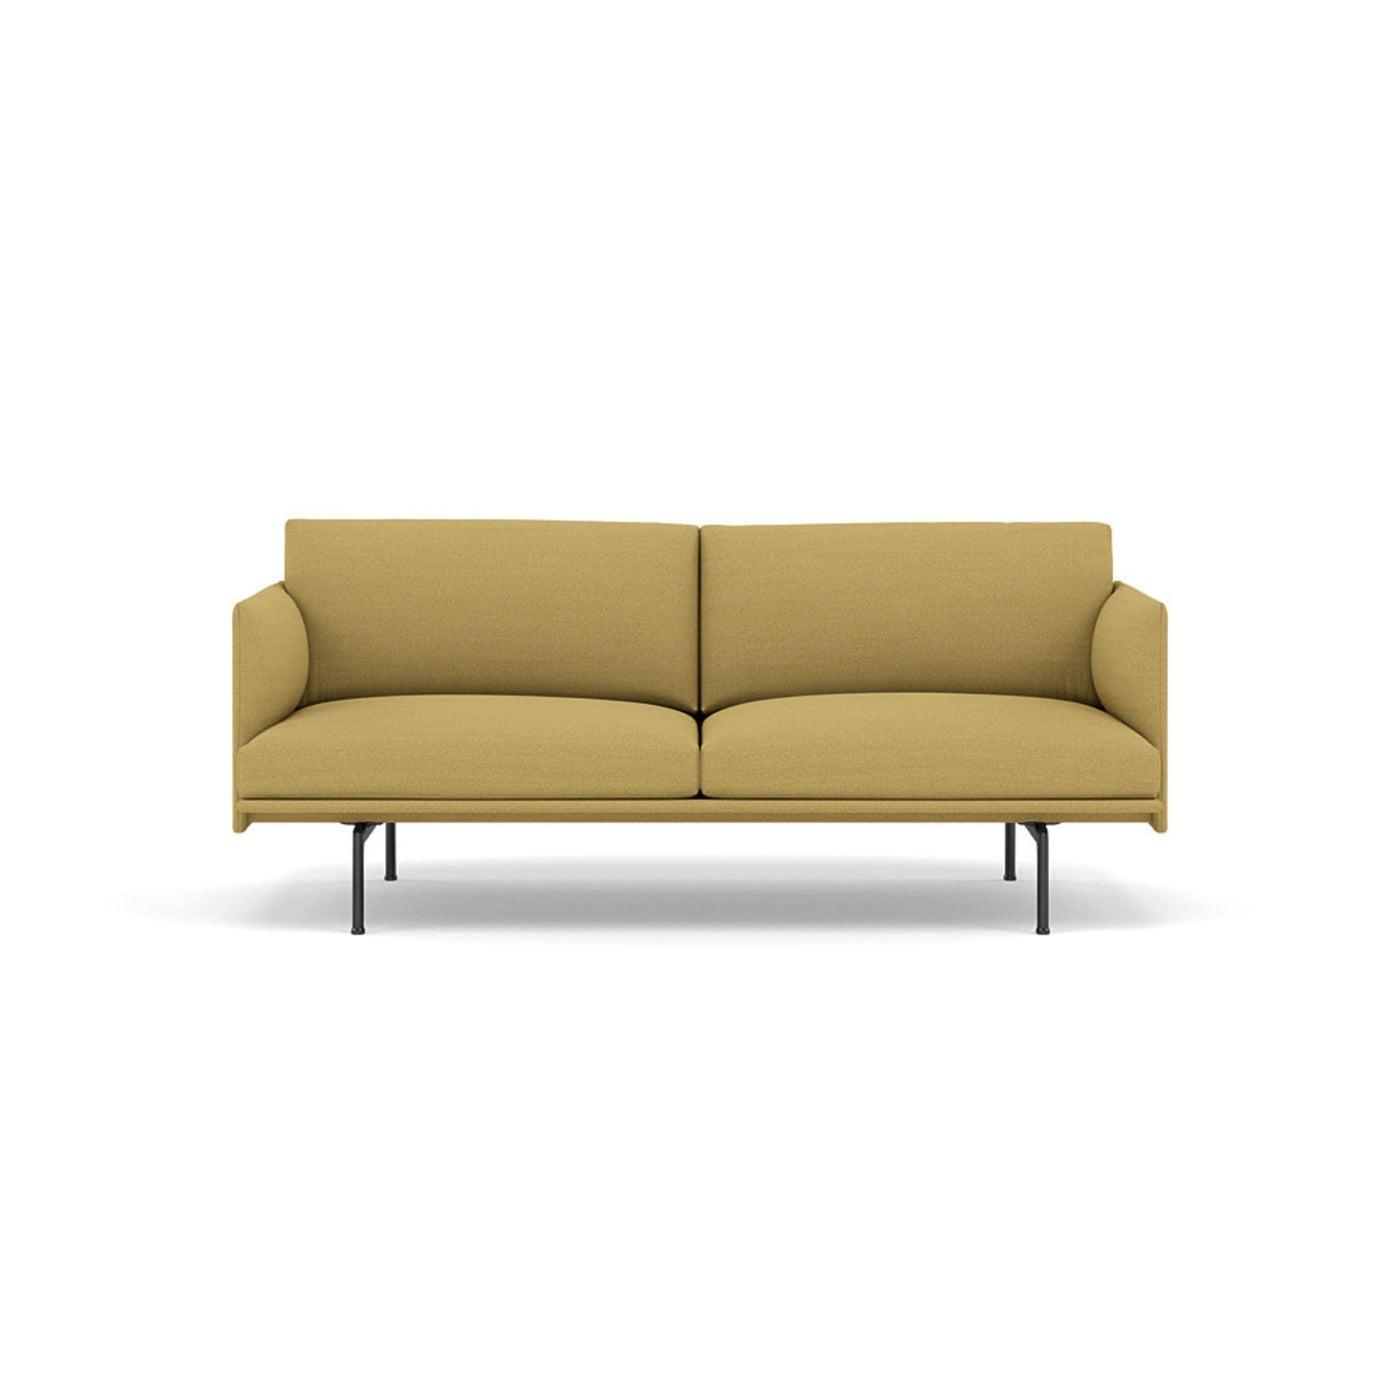 Muuto Outline Studio Sofa 170 in hallingdal 407 and black legs. Made to order from someday designs. #colour_hallingdal-407